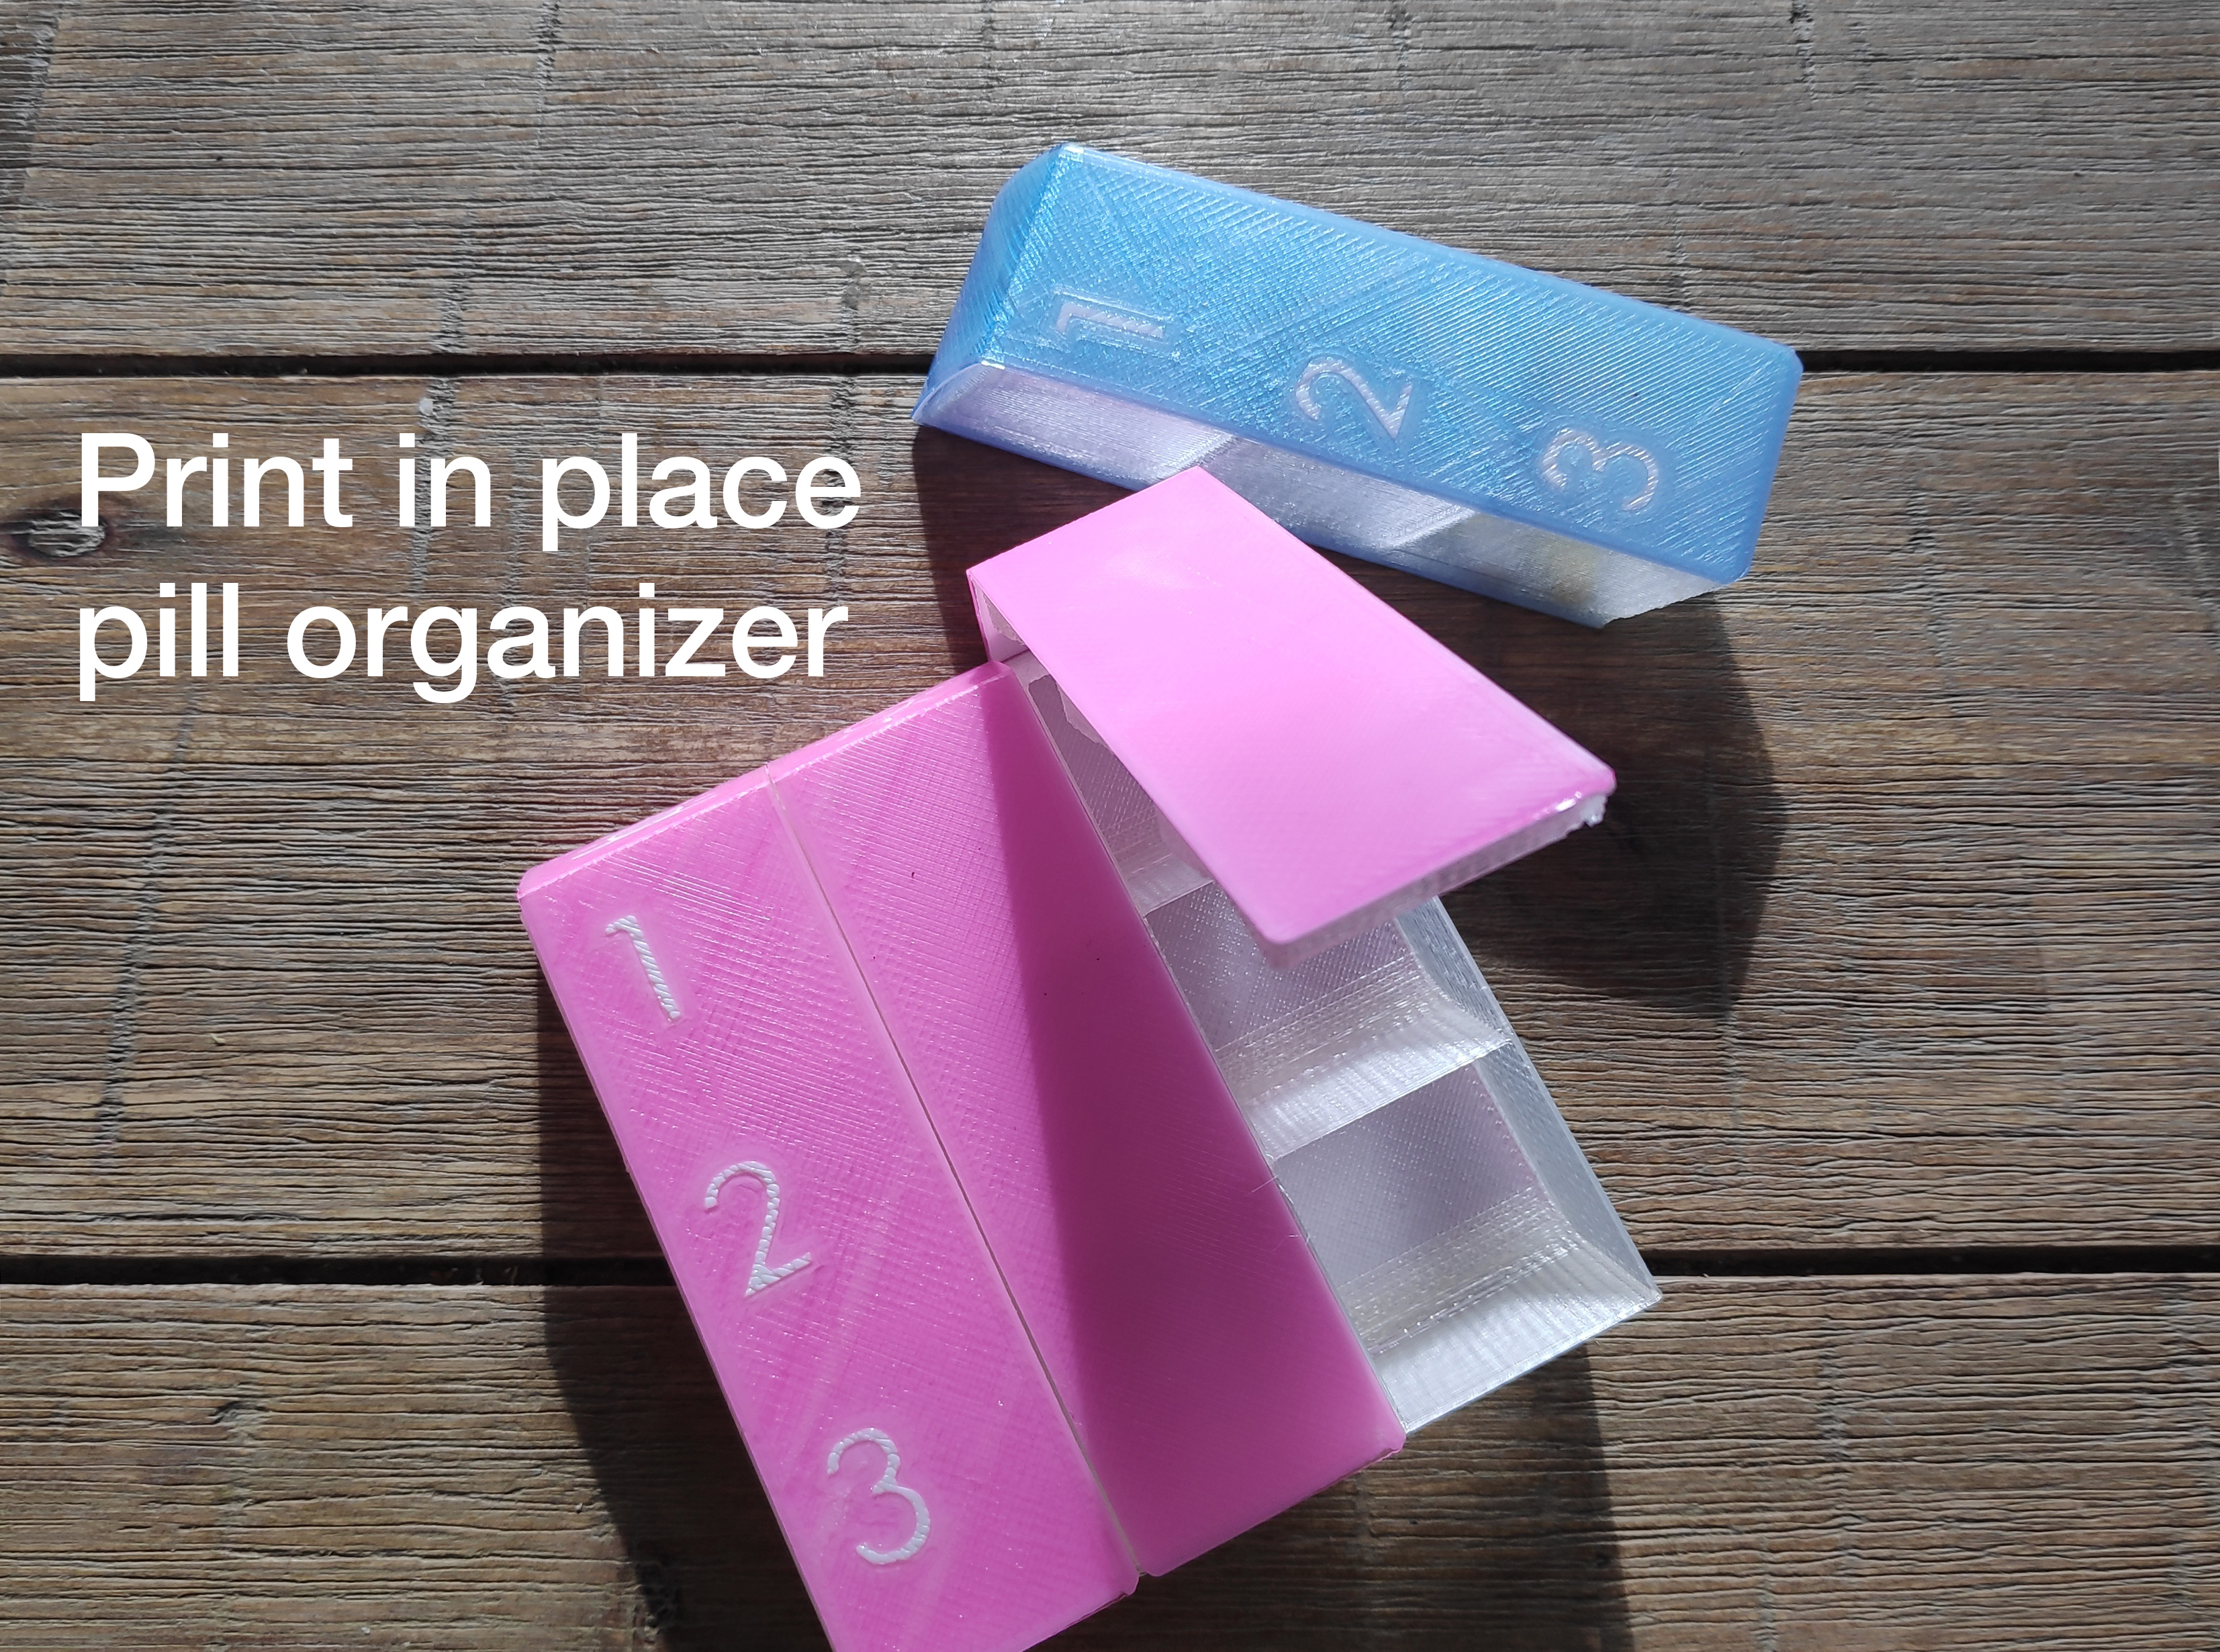 A simple pill organizer. Print in place.